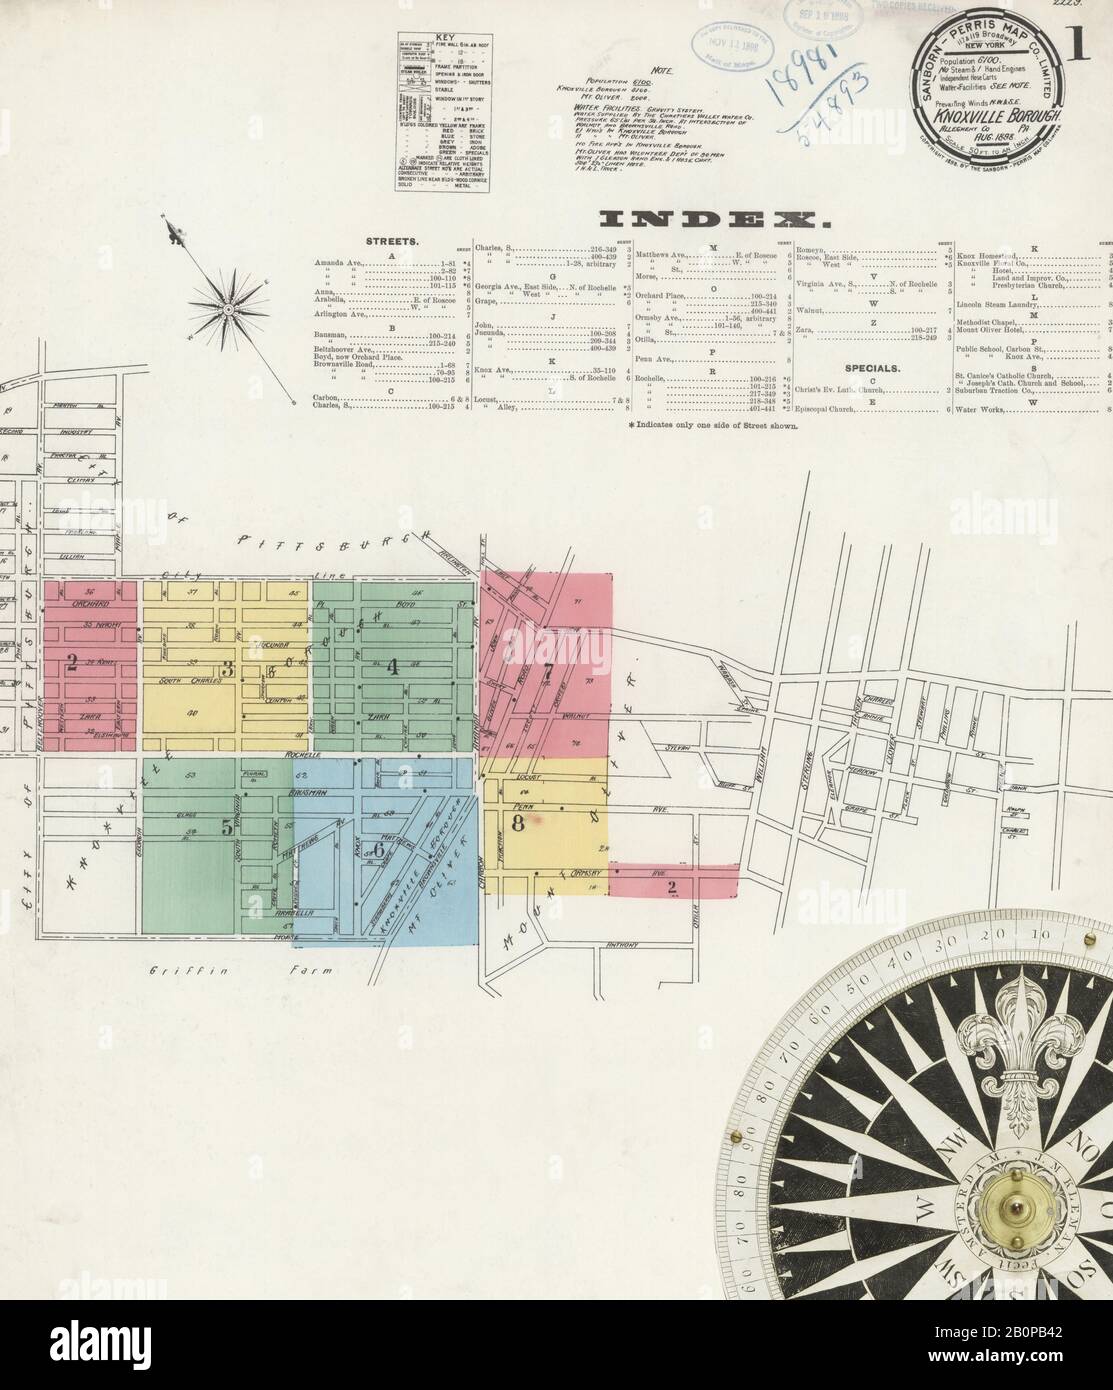 Image 1 of Sanborn Fire Insurance Map from Knoxville Borough, Allegheny County, Pennsylvania. Aug 1898. 8 Sheet(s). Acquired after 1981, America, street map with a Nineteenth Century compass Stock Photo